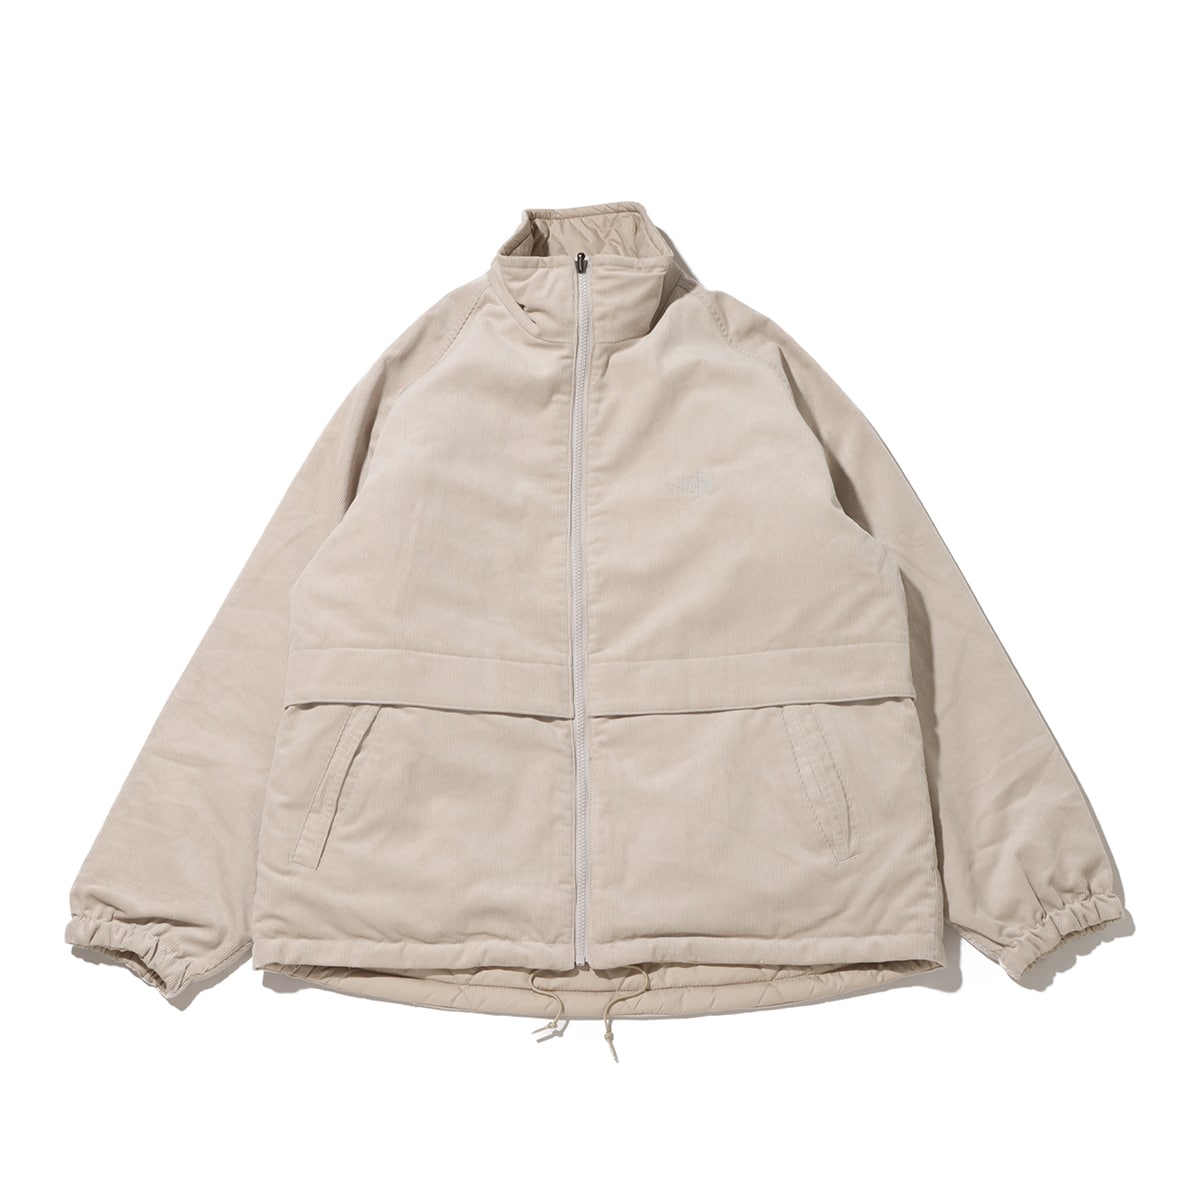 THE NORTH FACE PURPLE LABEL Corduroy Field Reversible Jacket Stone 